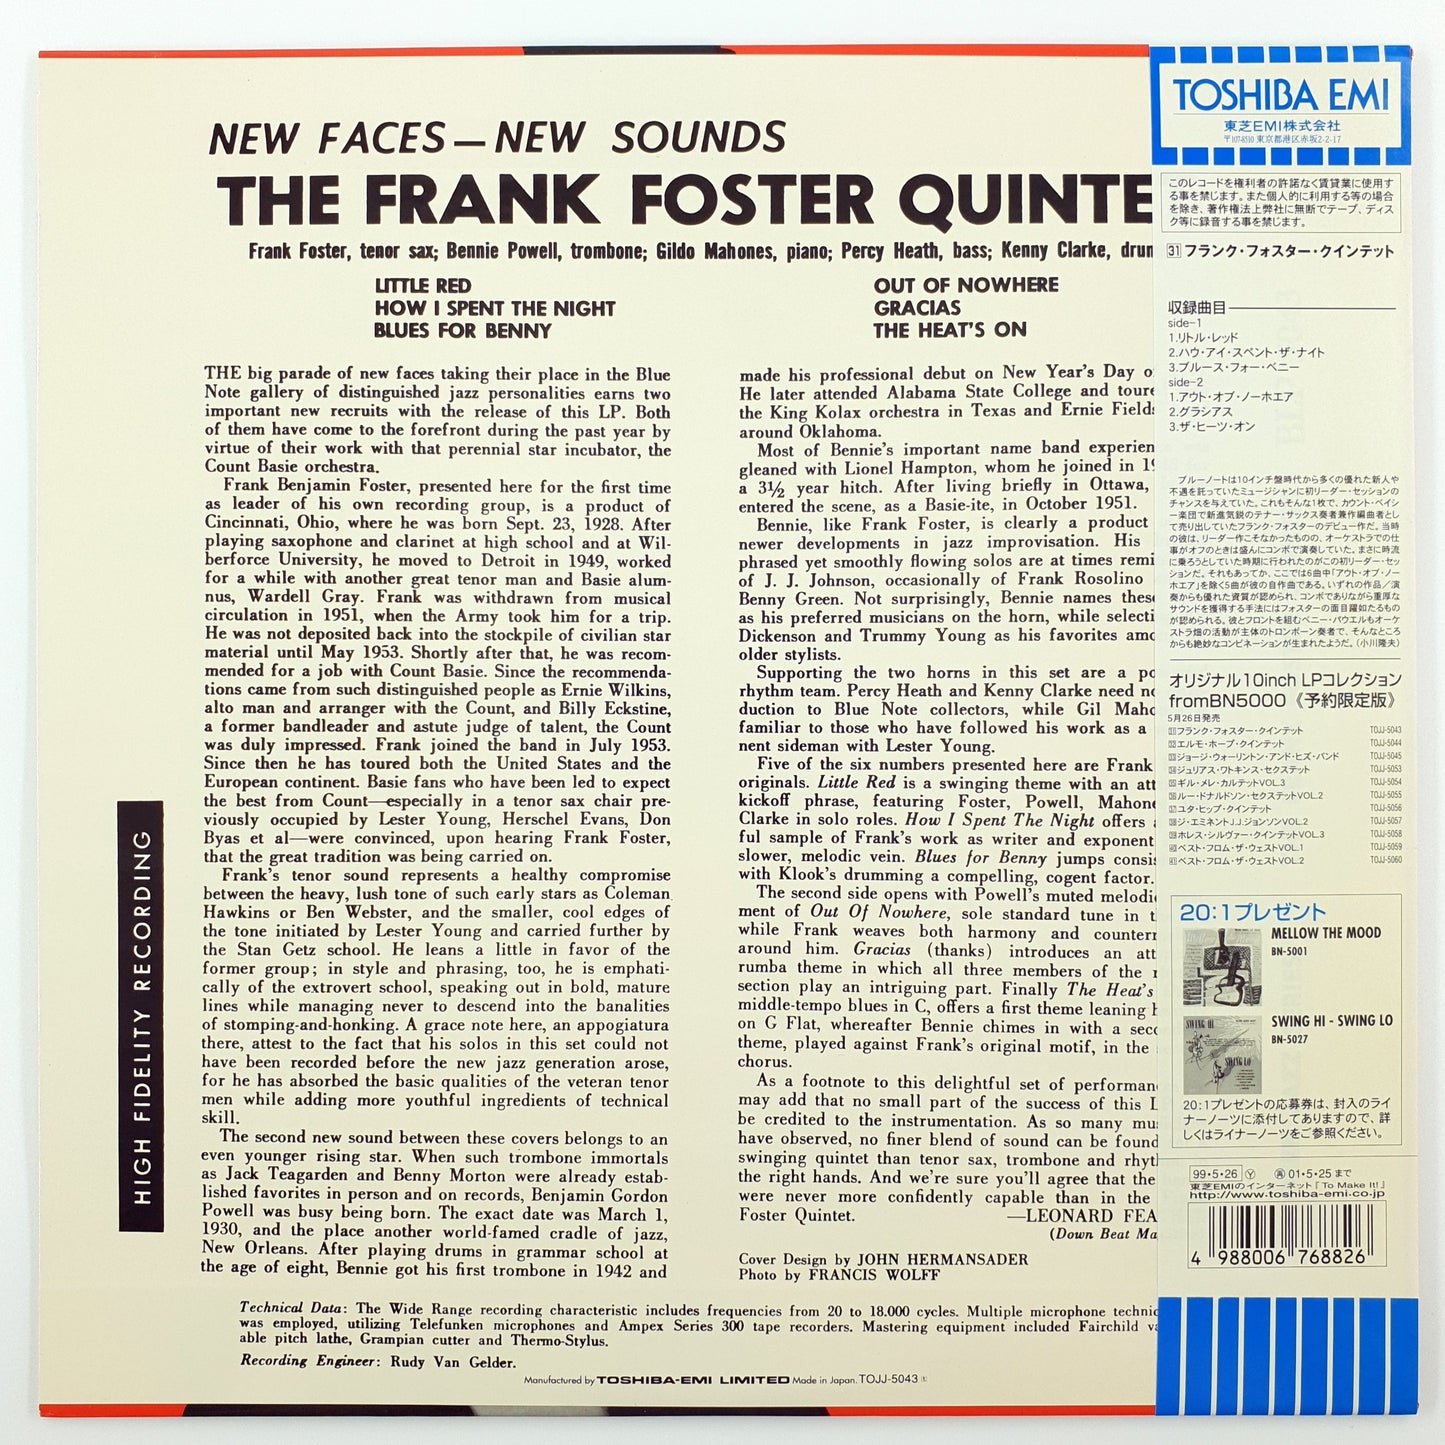 The Frank Foster Quintet – Here Comes Frank Foster